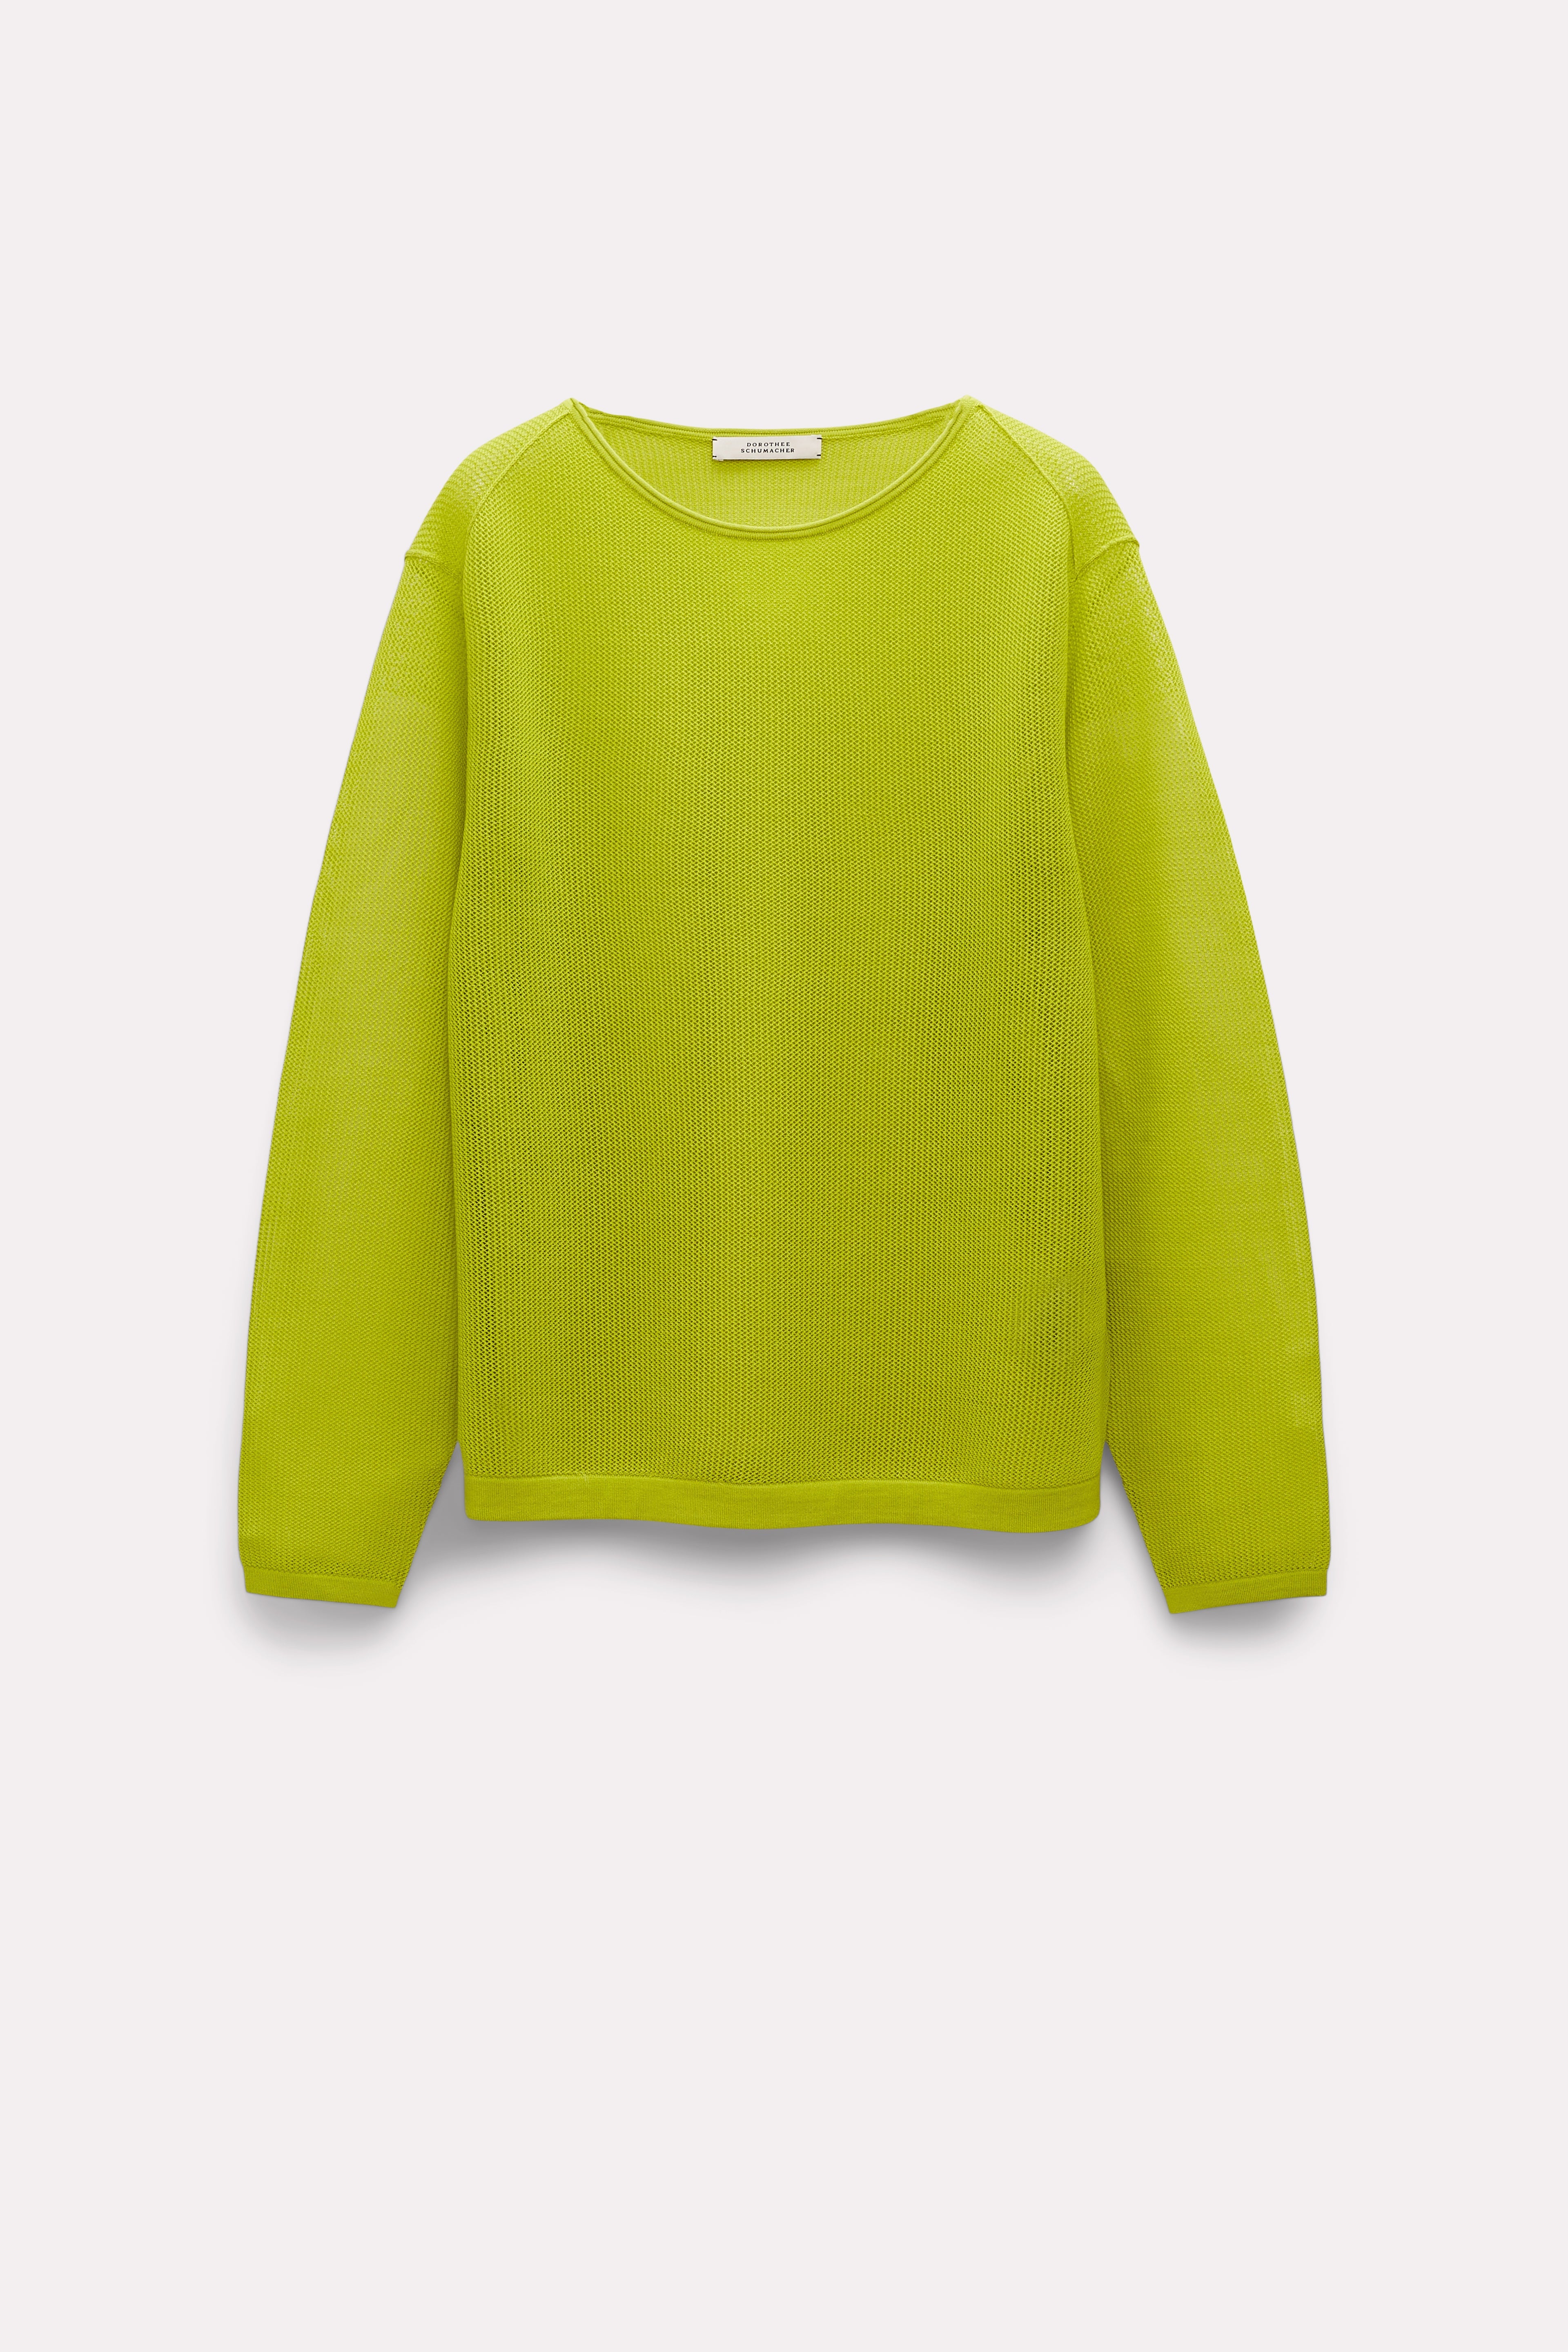 Dorothee-Schumacher-OUTLET-SALE-ESSENTIAL-EASE-pullover-Strick-ARCHIVE-COLLECTION_44903330-ff63-425e-865e-6e2ed4f11d54.jpg